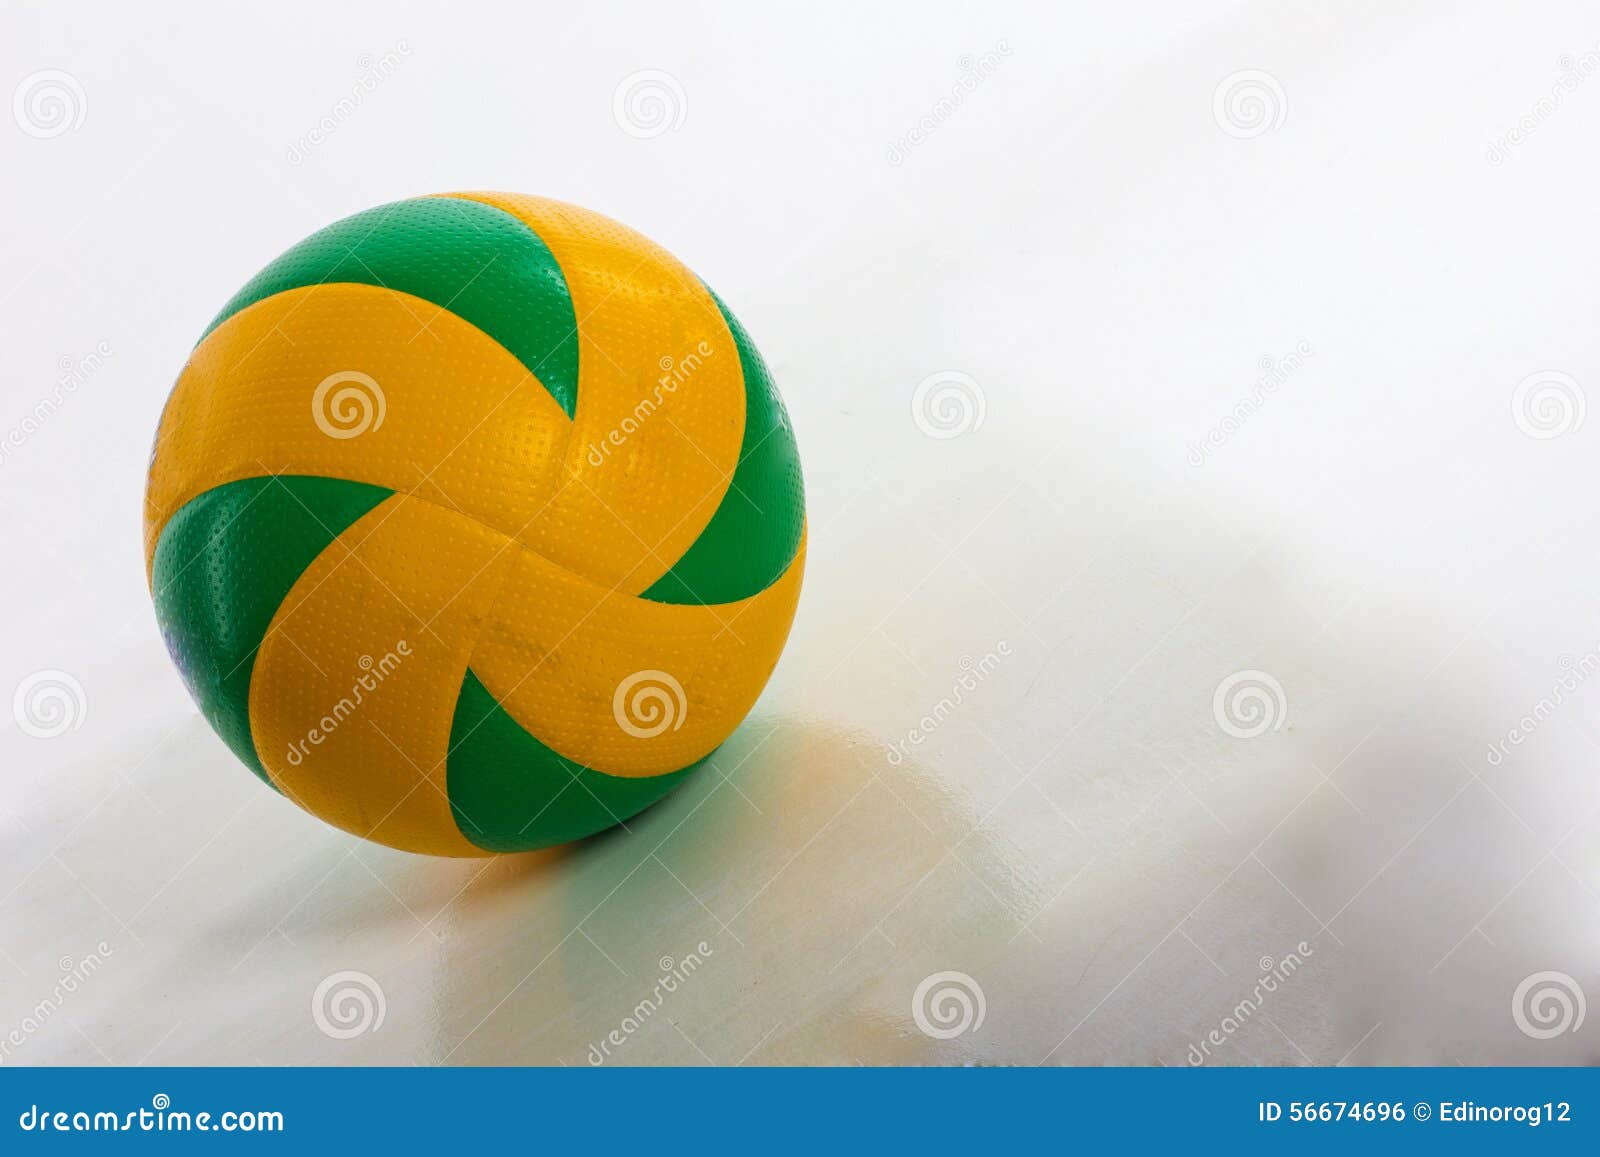 Modern Sport Ball on a White Background Stock Photo - Image of isolated ...